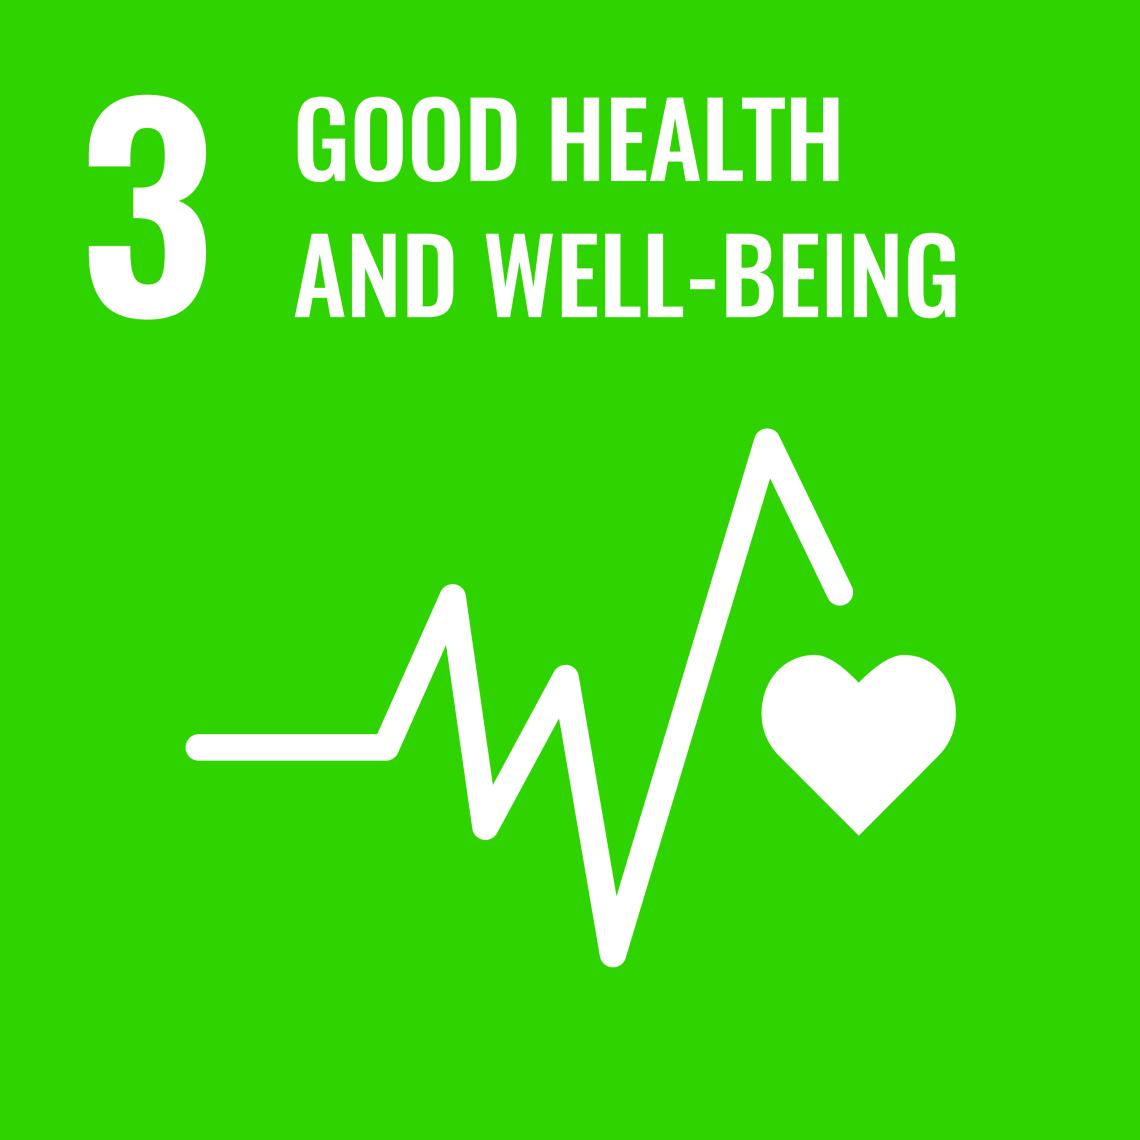 SDG 3 Good Health and Well being